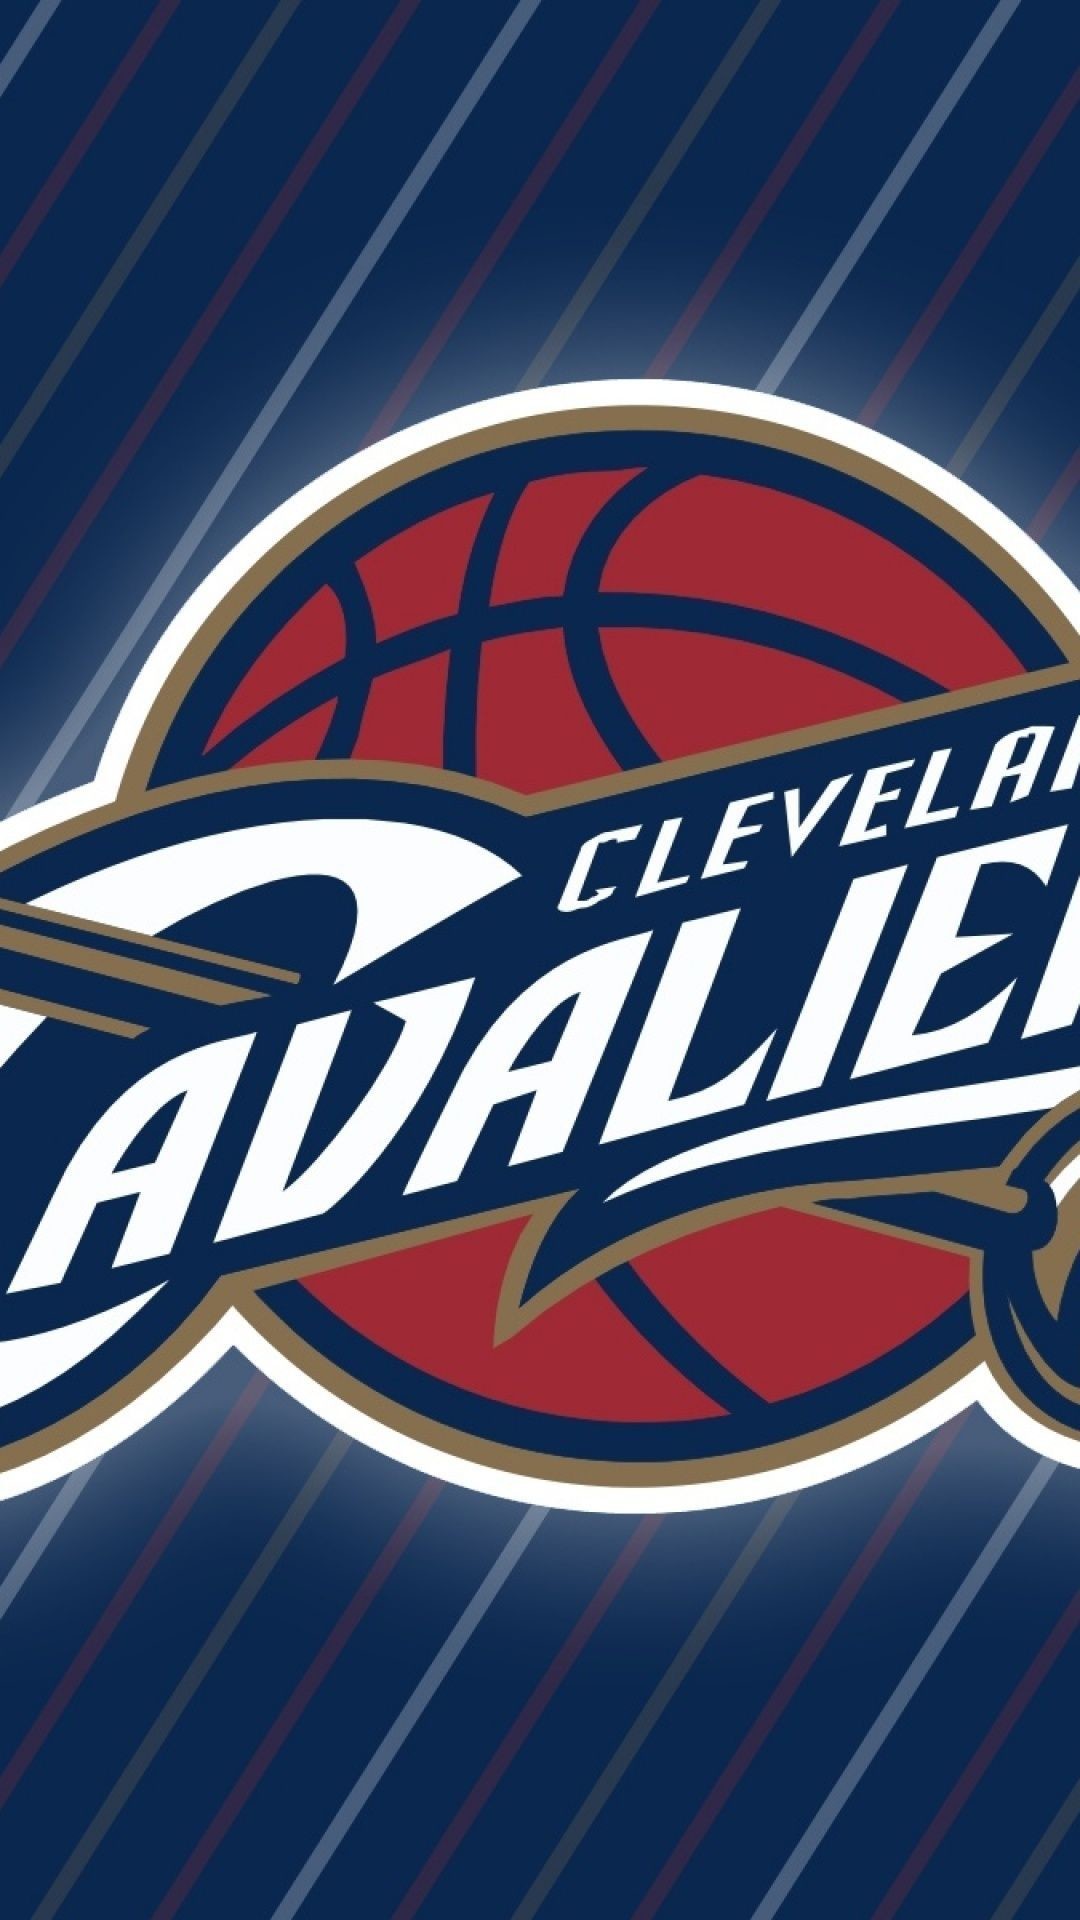 1080x1920 Cleveland Cavaliers S4 Wallpaper | ID: 25846